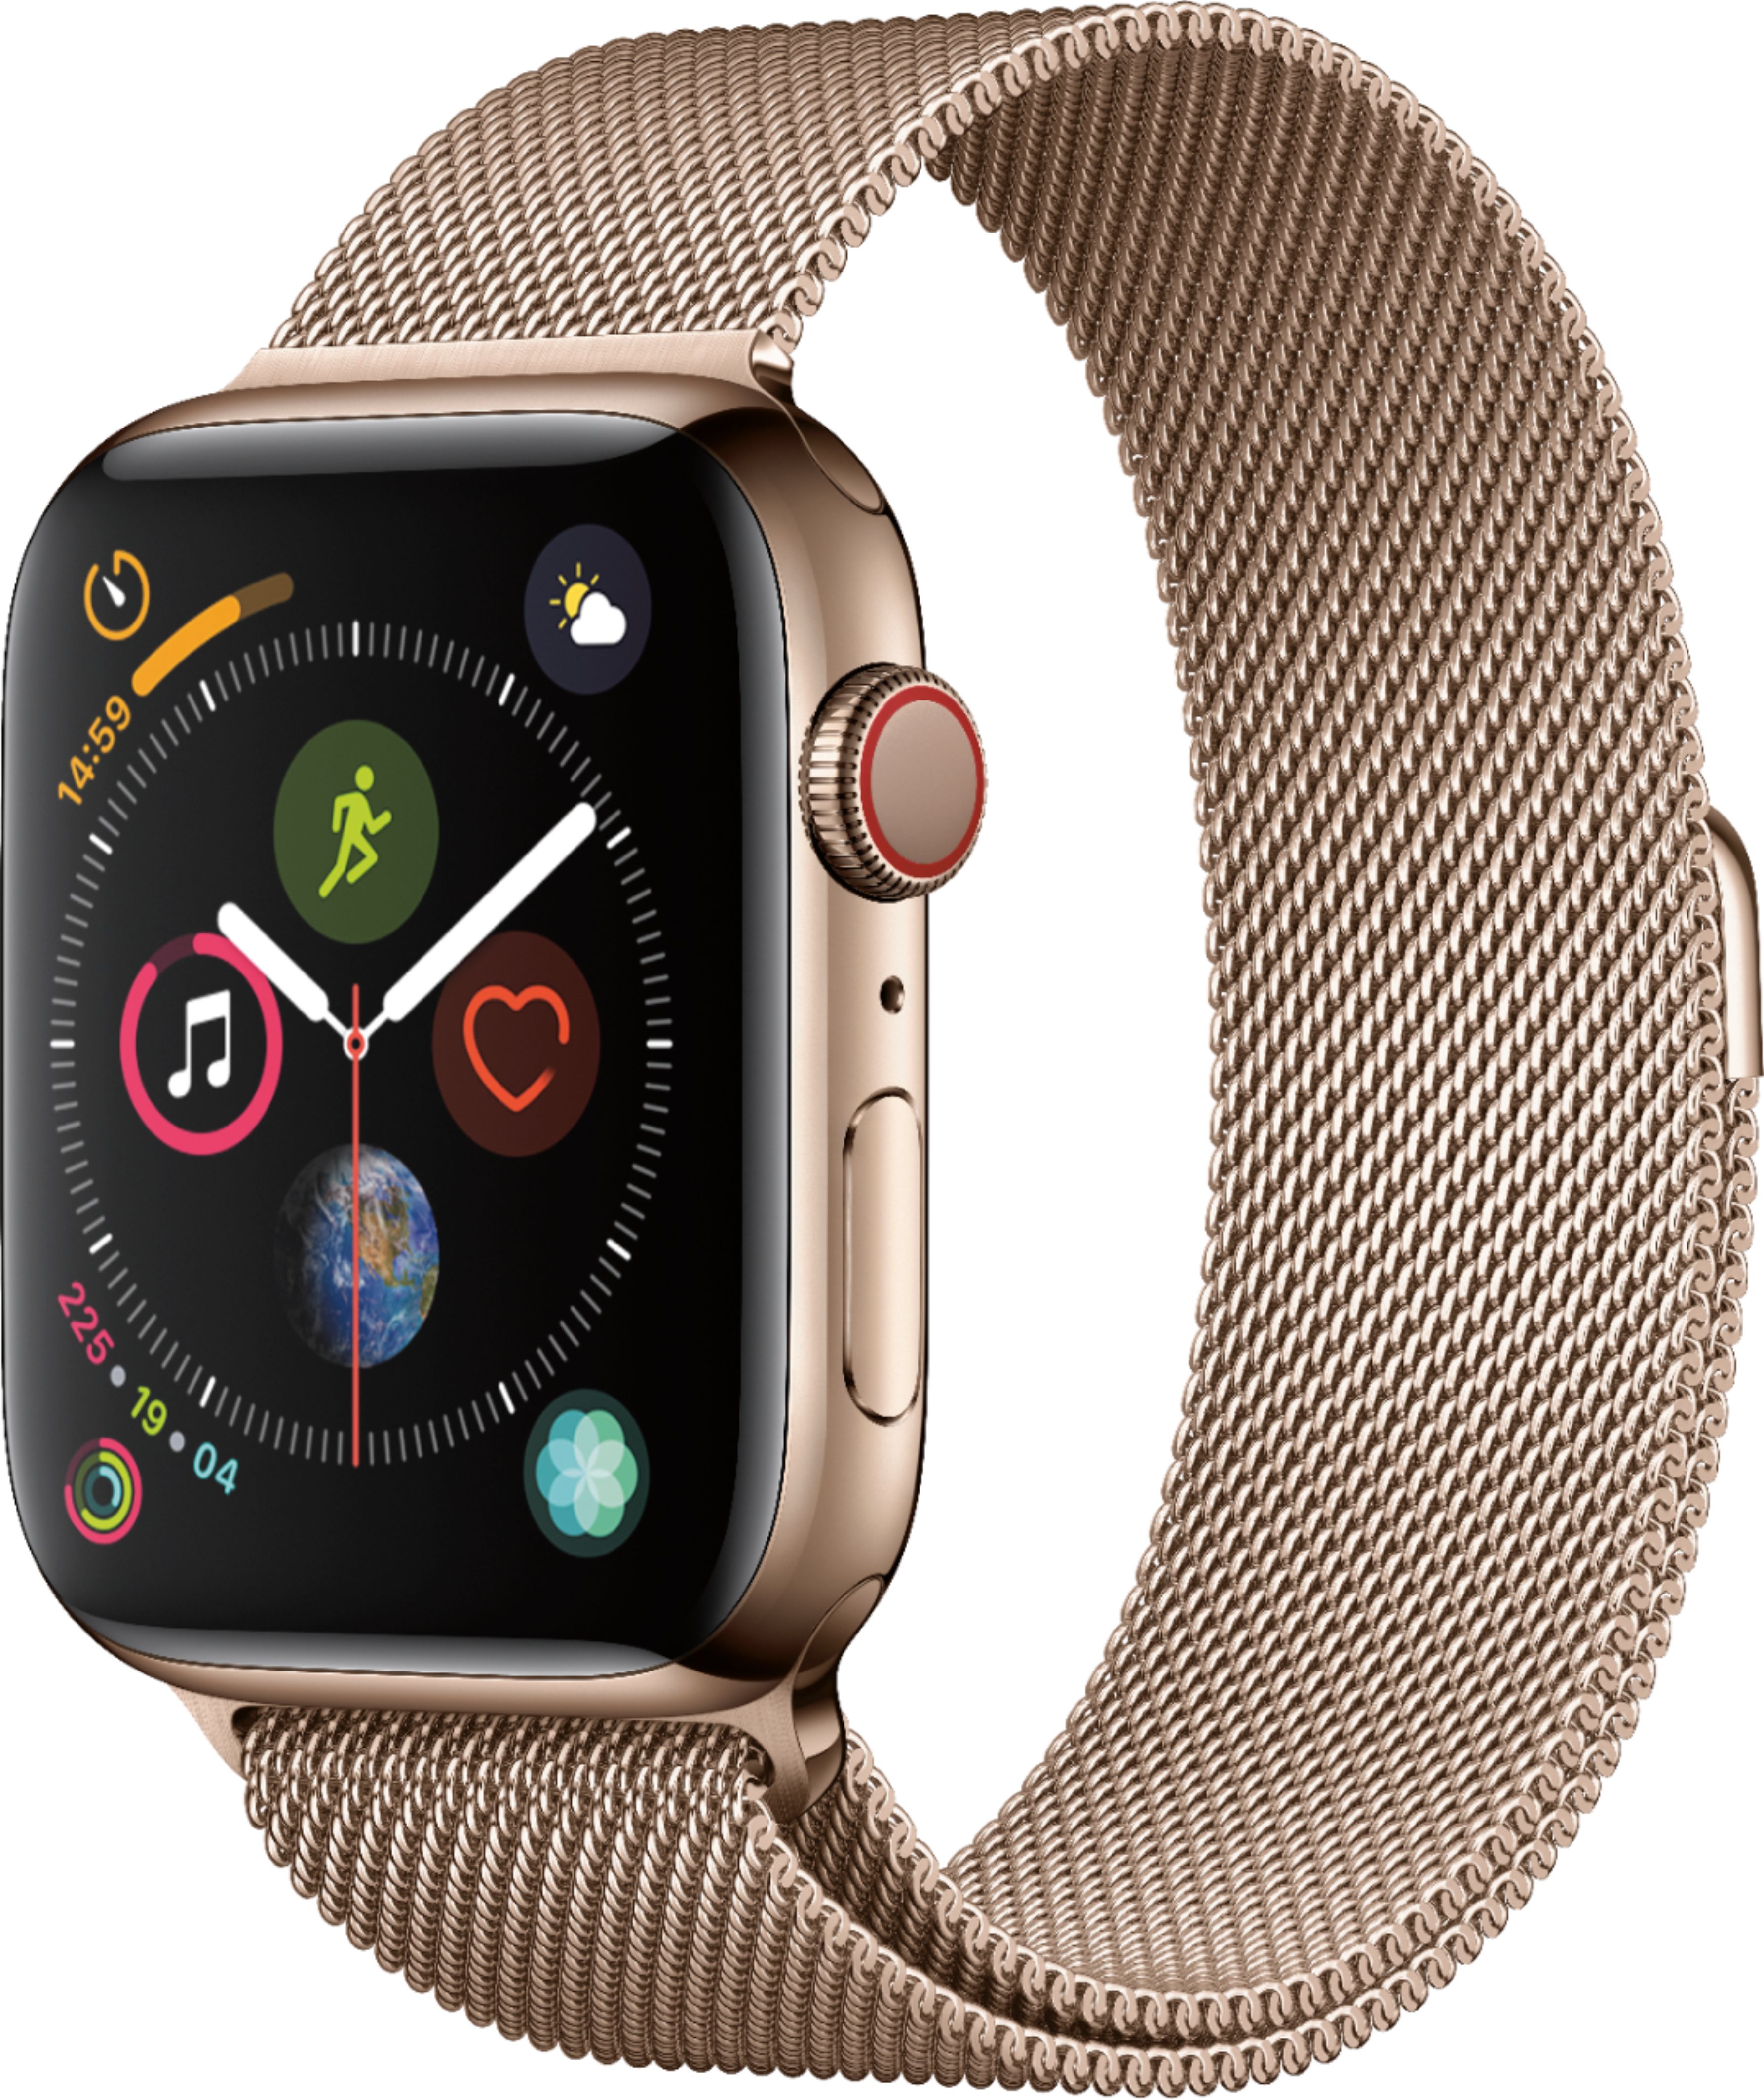 Apple Watch Series 4 Wifi And Cellular Online, 58% OFF | www ...